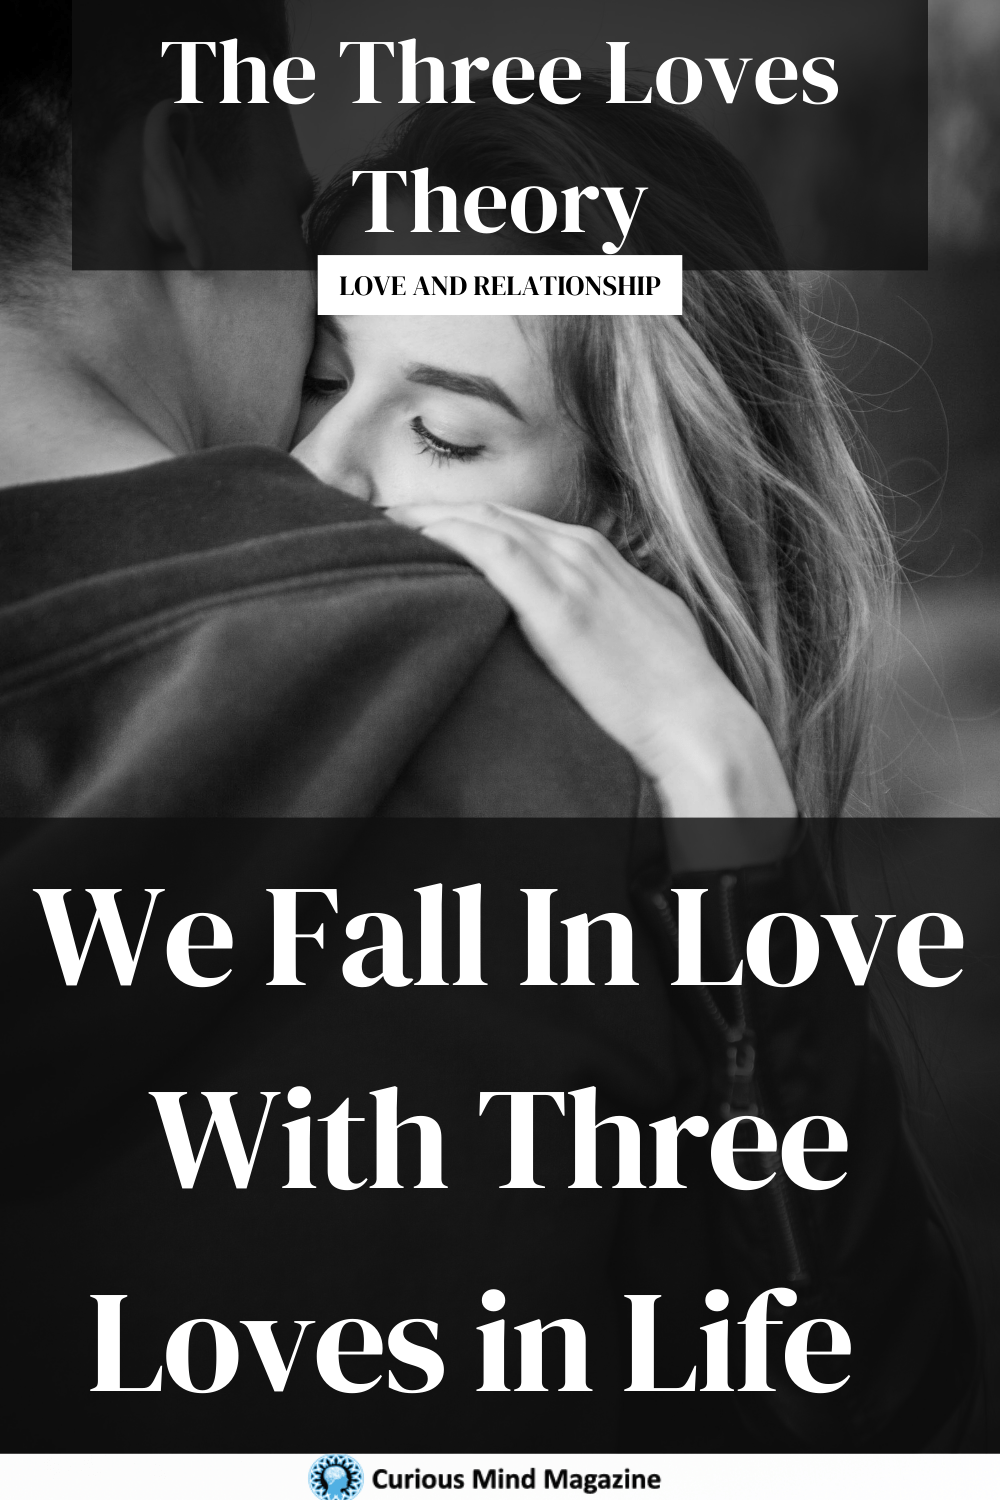 We Fall In Love With 3 Loves in Life - The Three Loves Theory